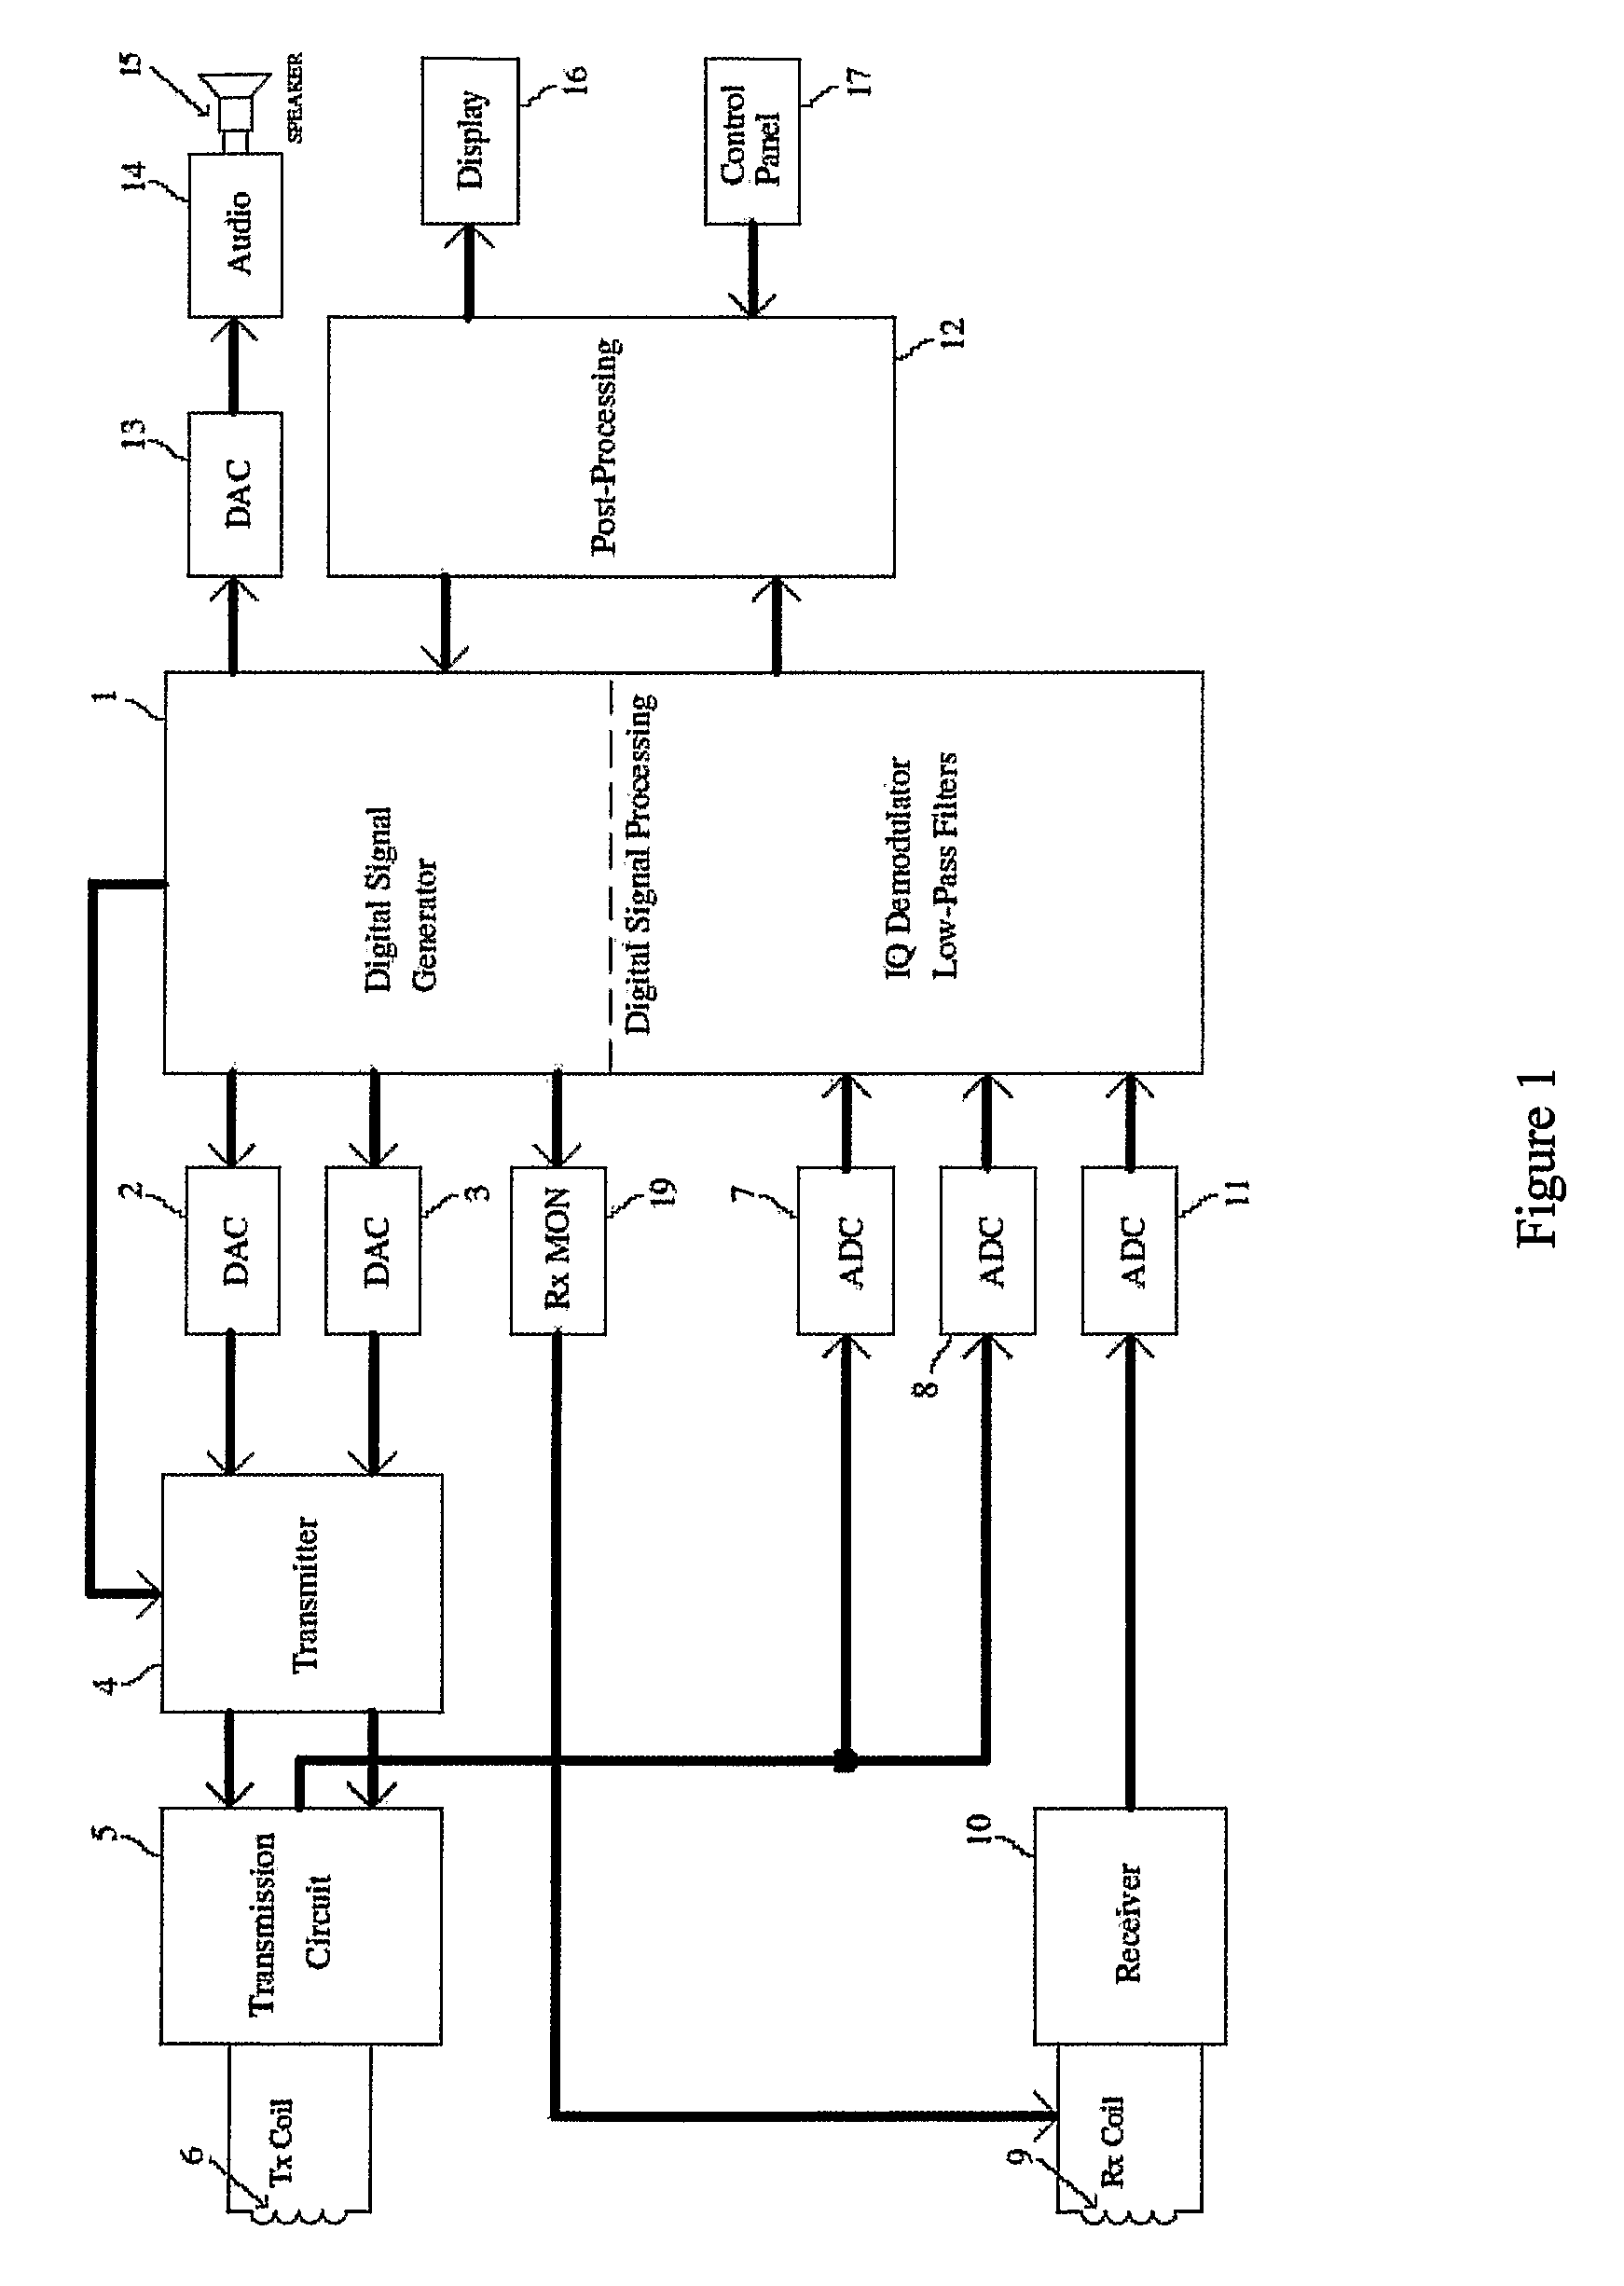 Method and apparatus for metal detection employing digital signal processing